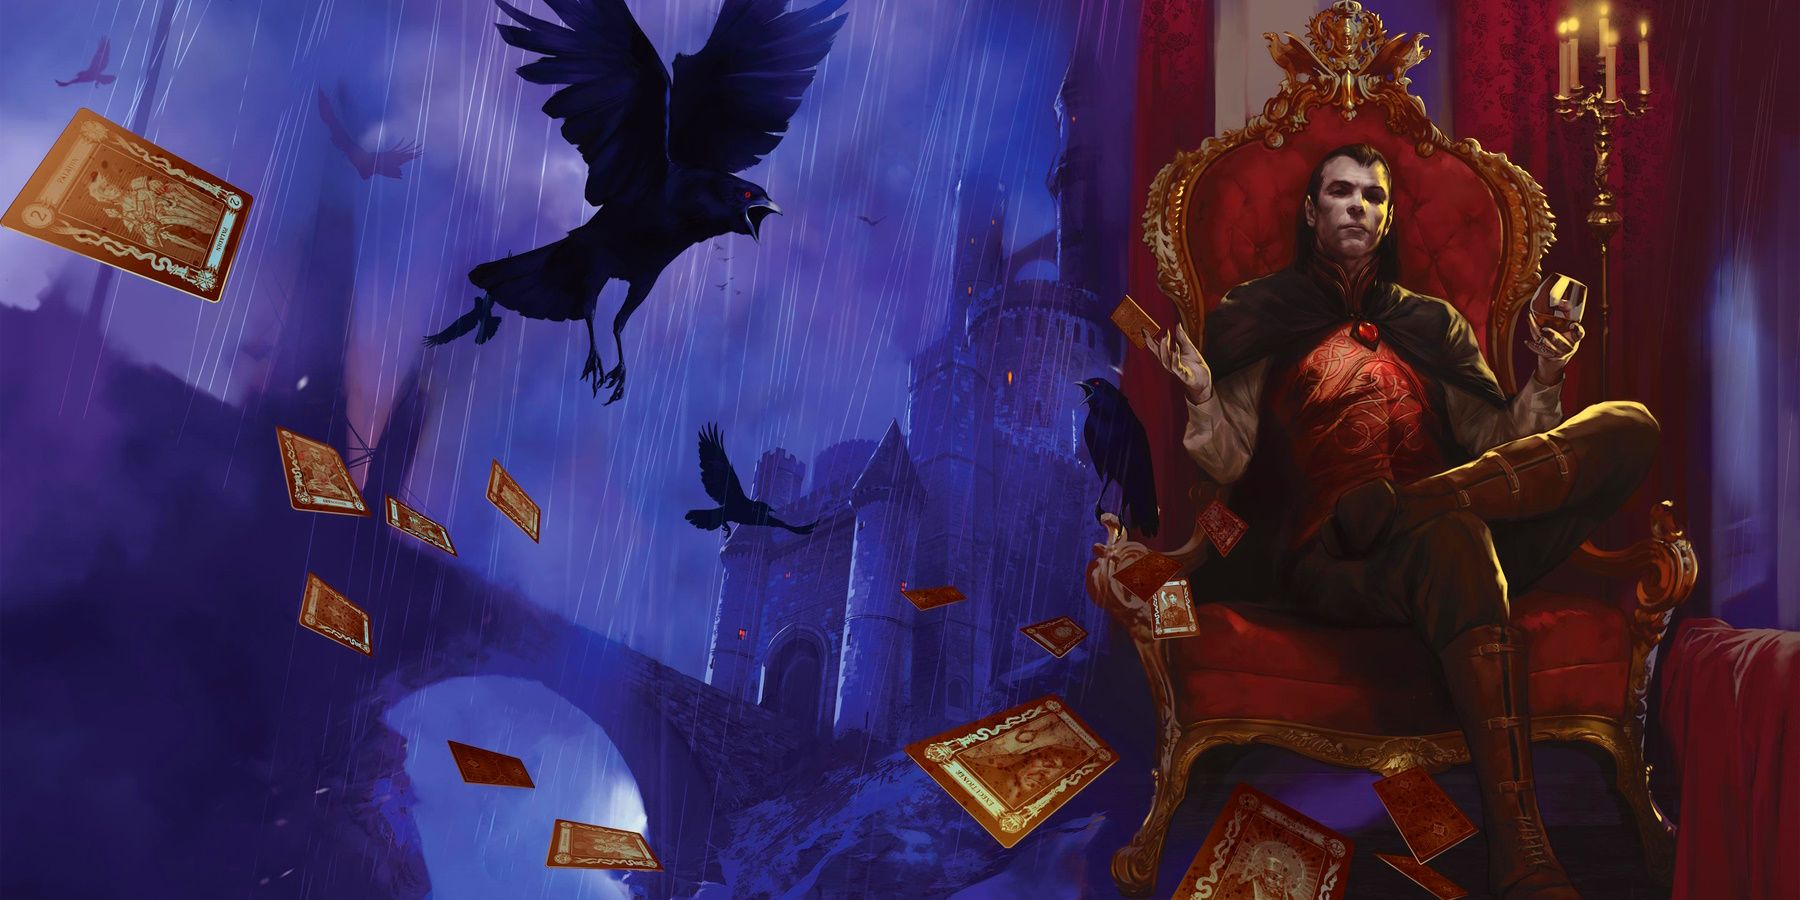 A raven flies over a desk of cards spilling out into the rain soaked night as Count Strahd sits casually on an ornate chair.